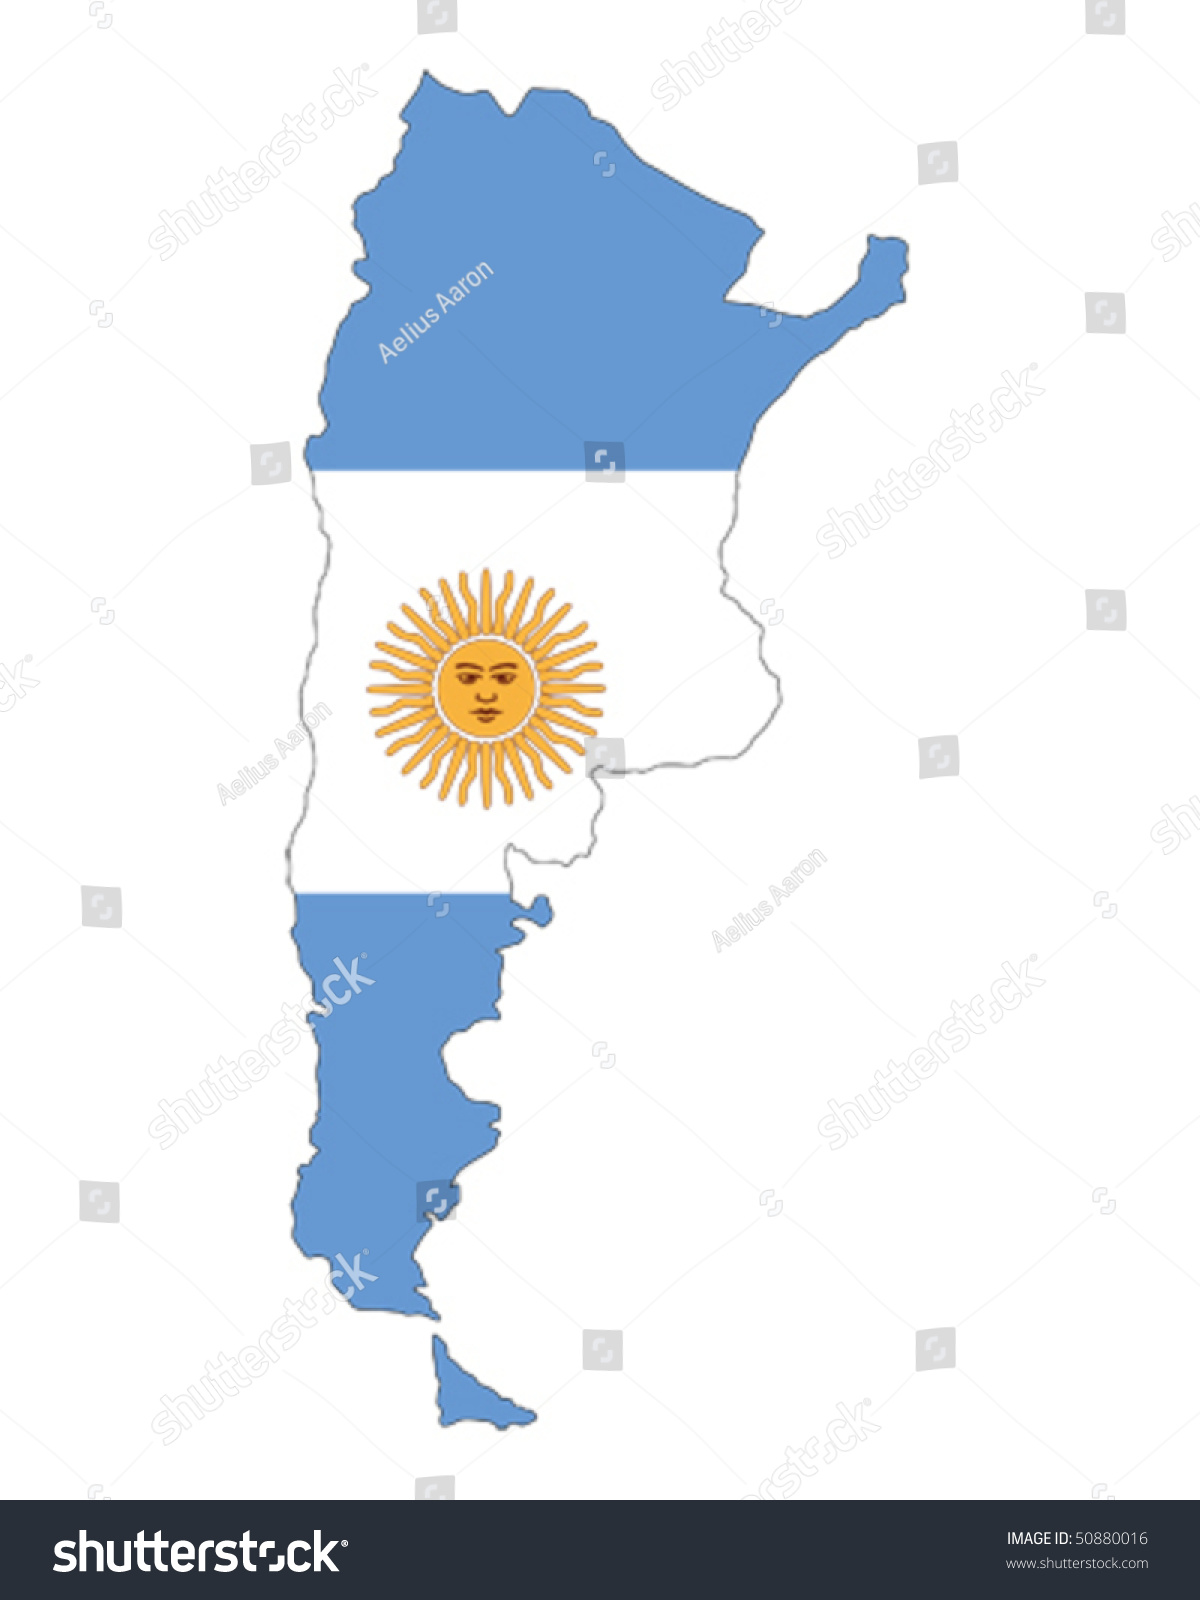 clipart map of argentina - photo #41